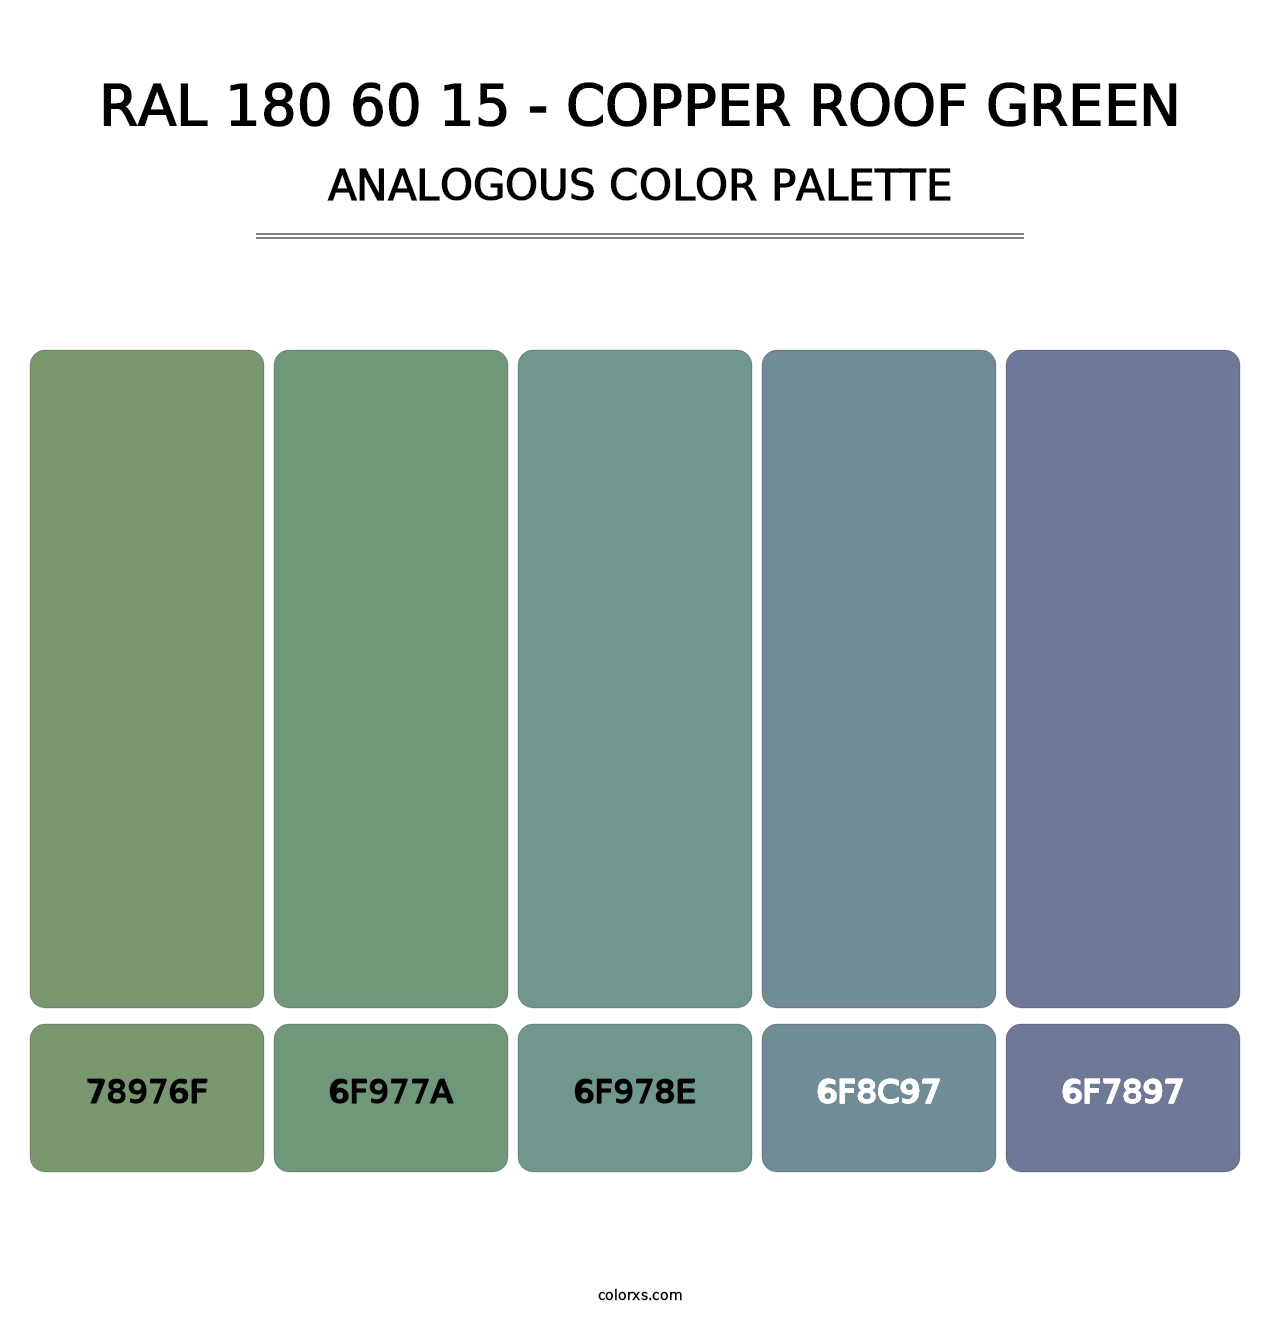 RAL 180 60 15 - Copper Roof Green - Analogous Color Palette